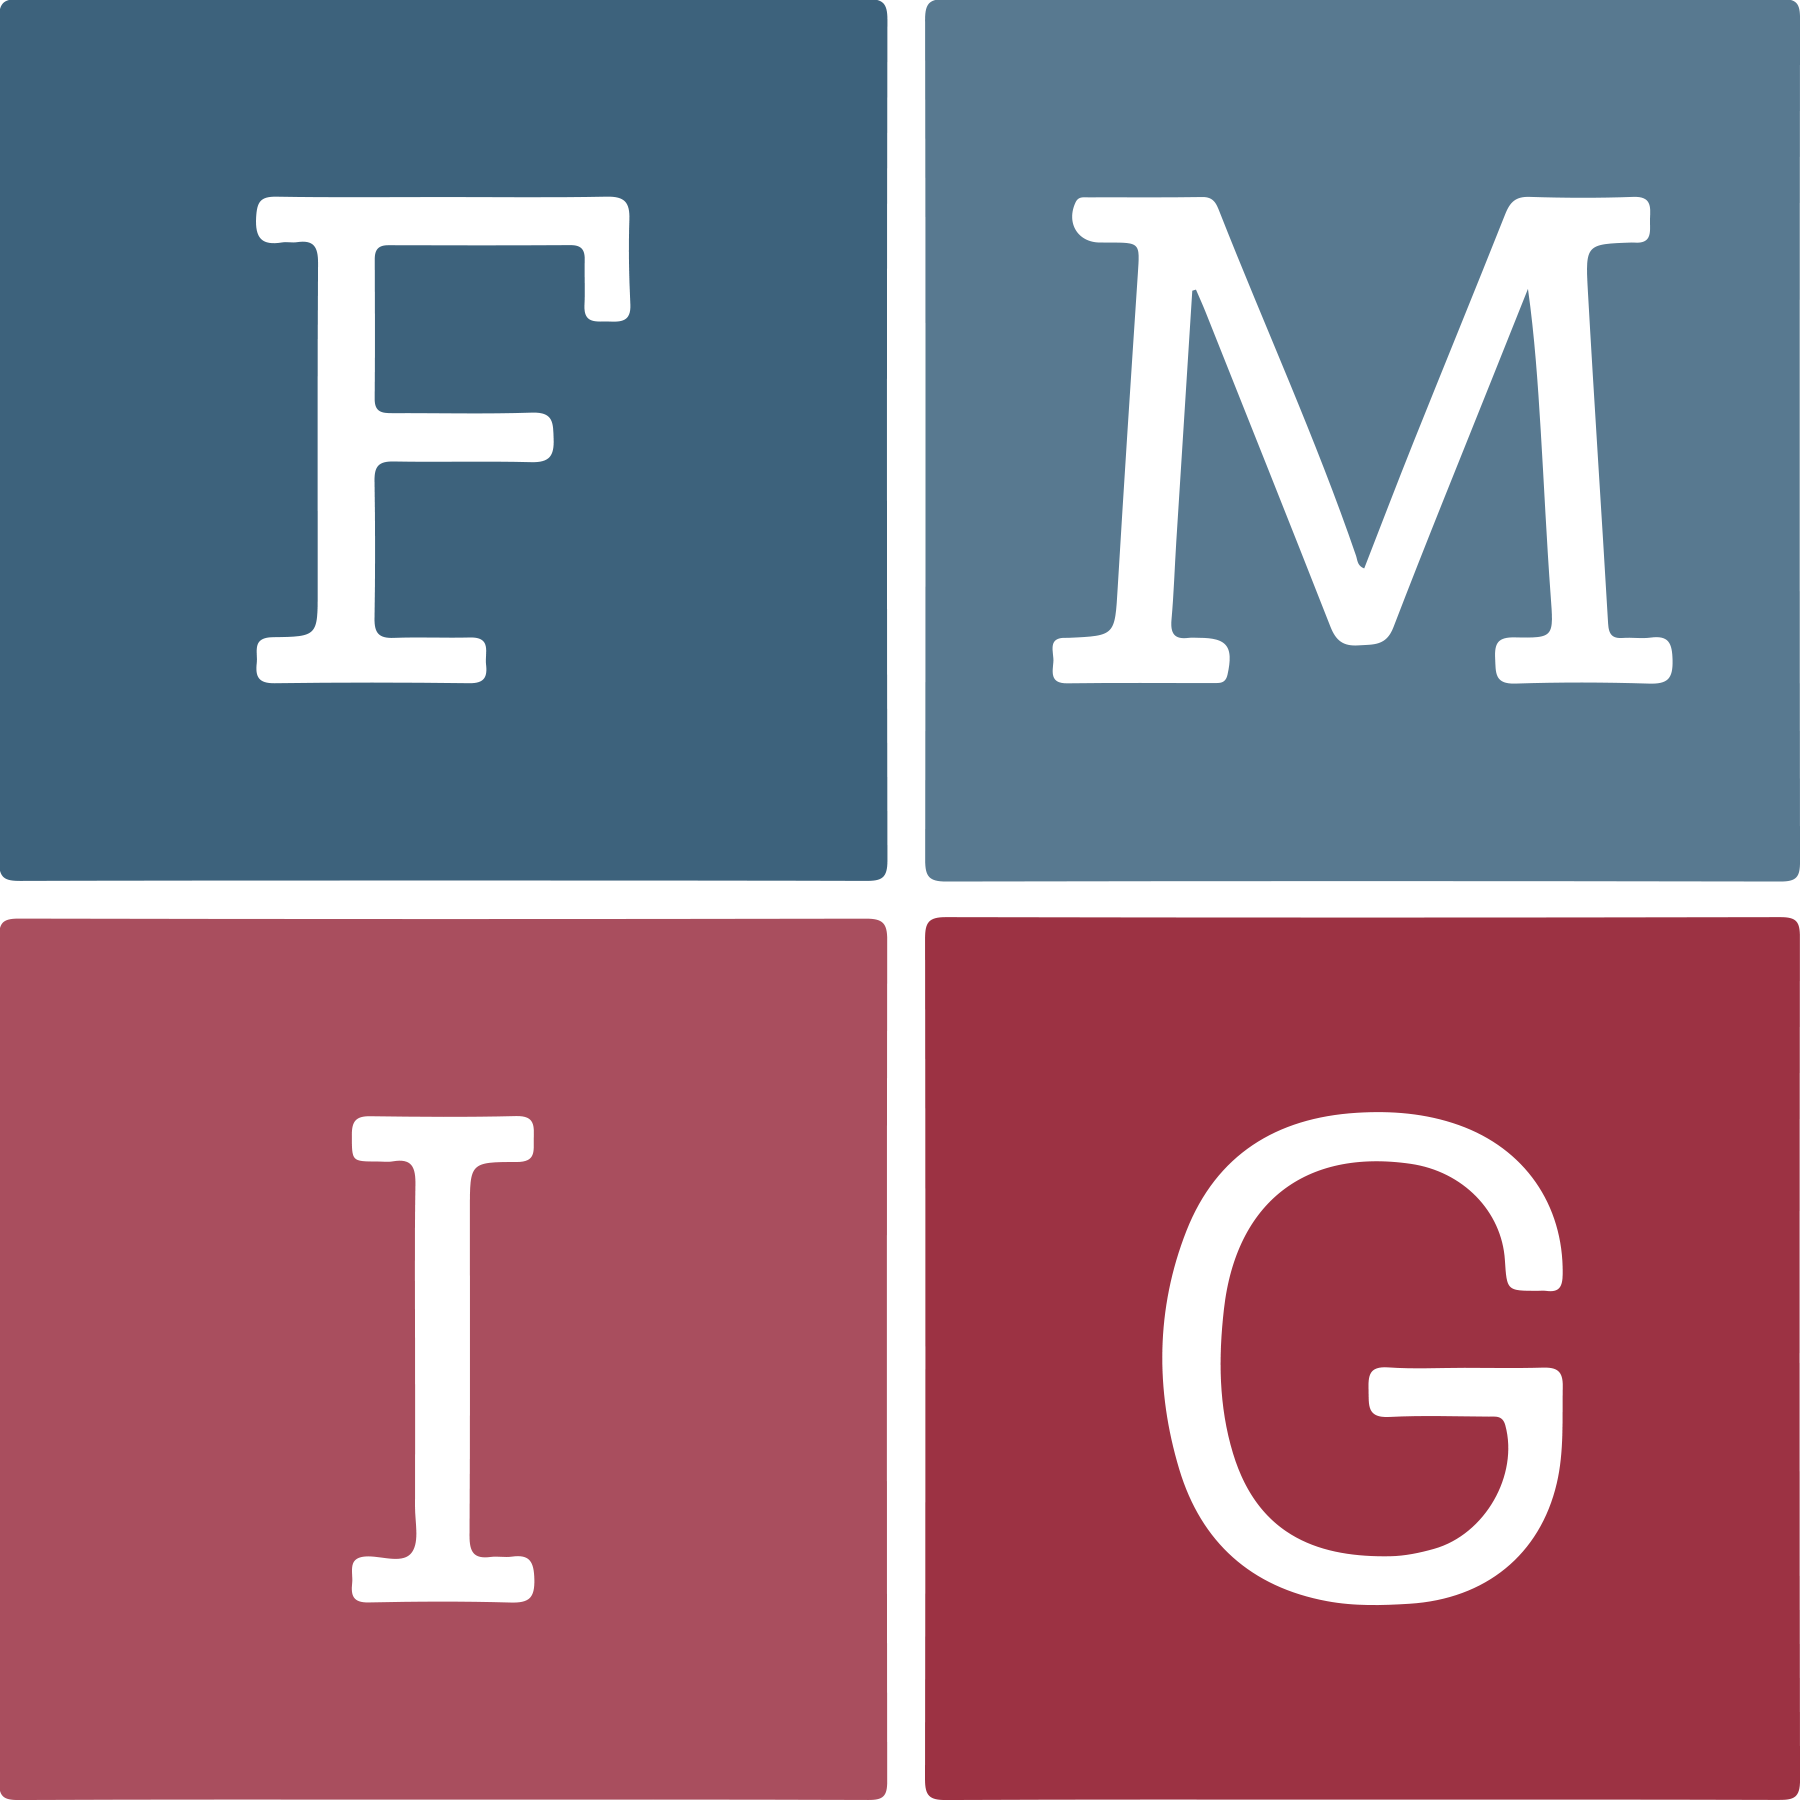 Joining an FMIG during medical school is an excellent way to explore the specialty of family medicine.